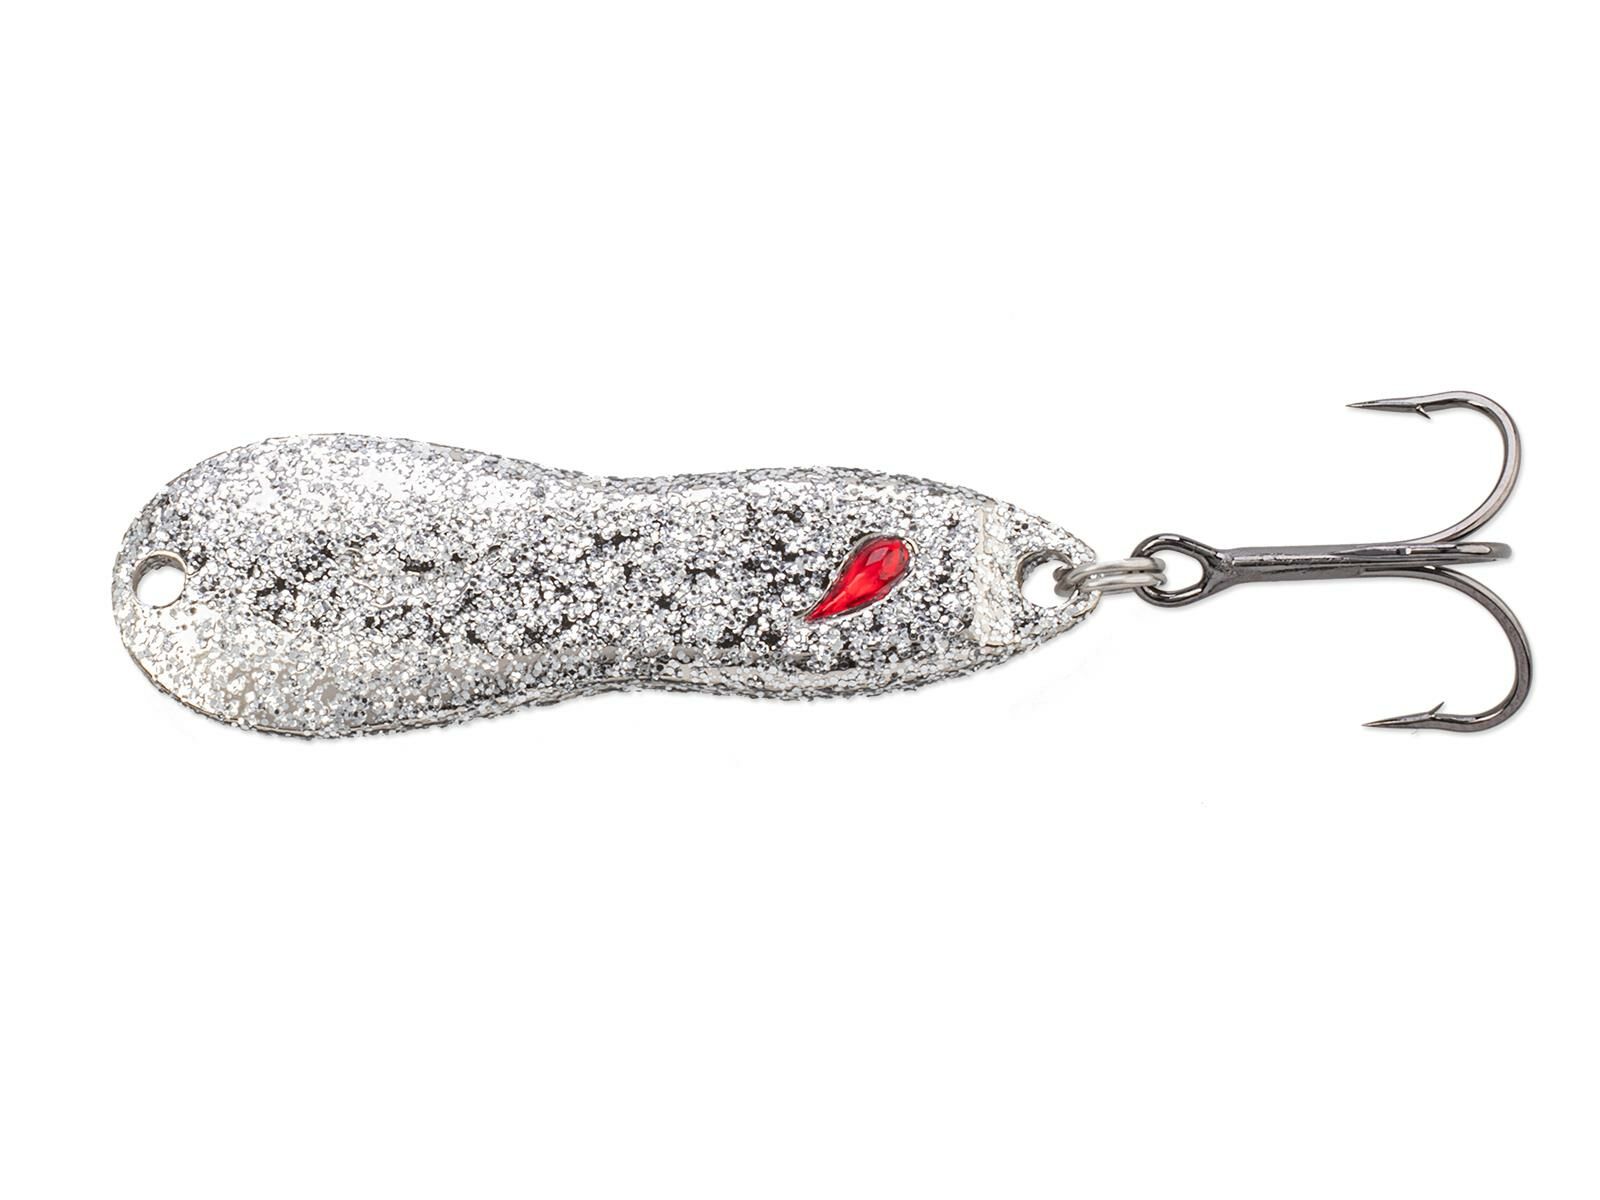 NORIES 18g Metal Wasaby (BR-313) Bait Ball